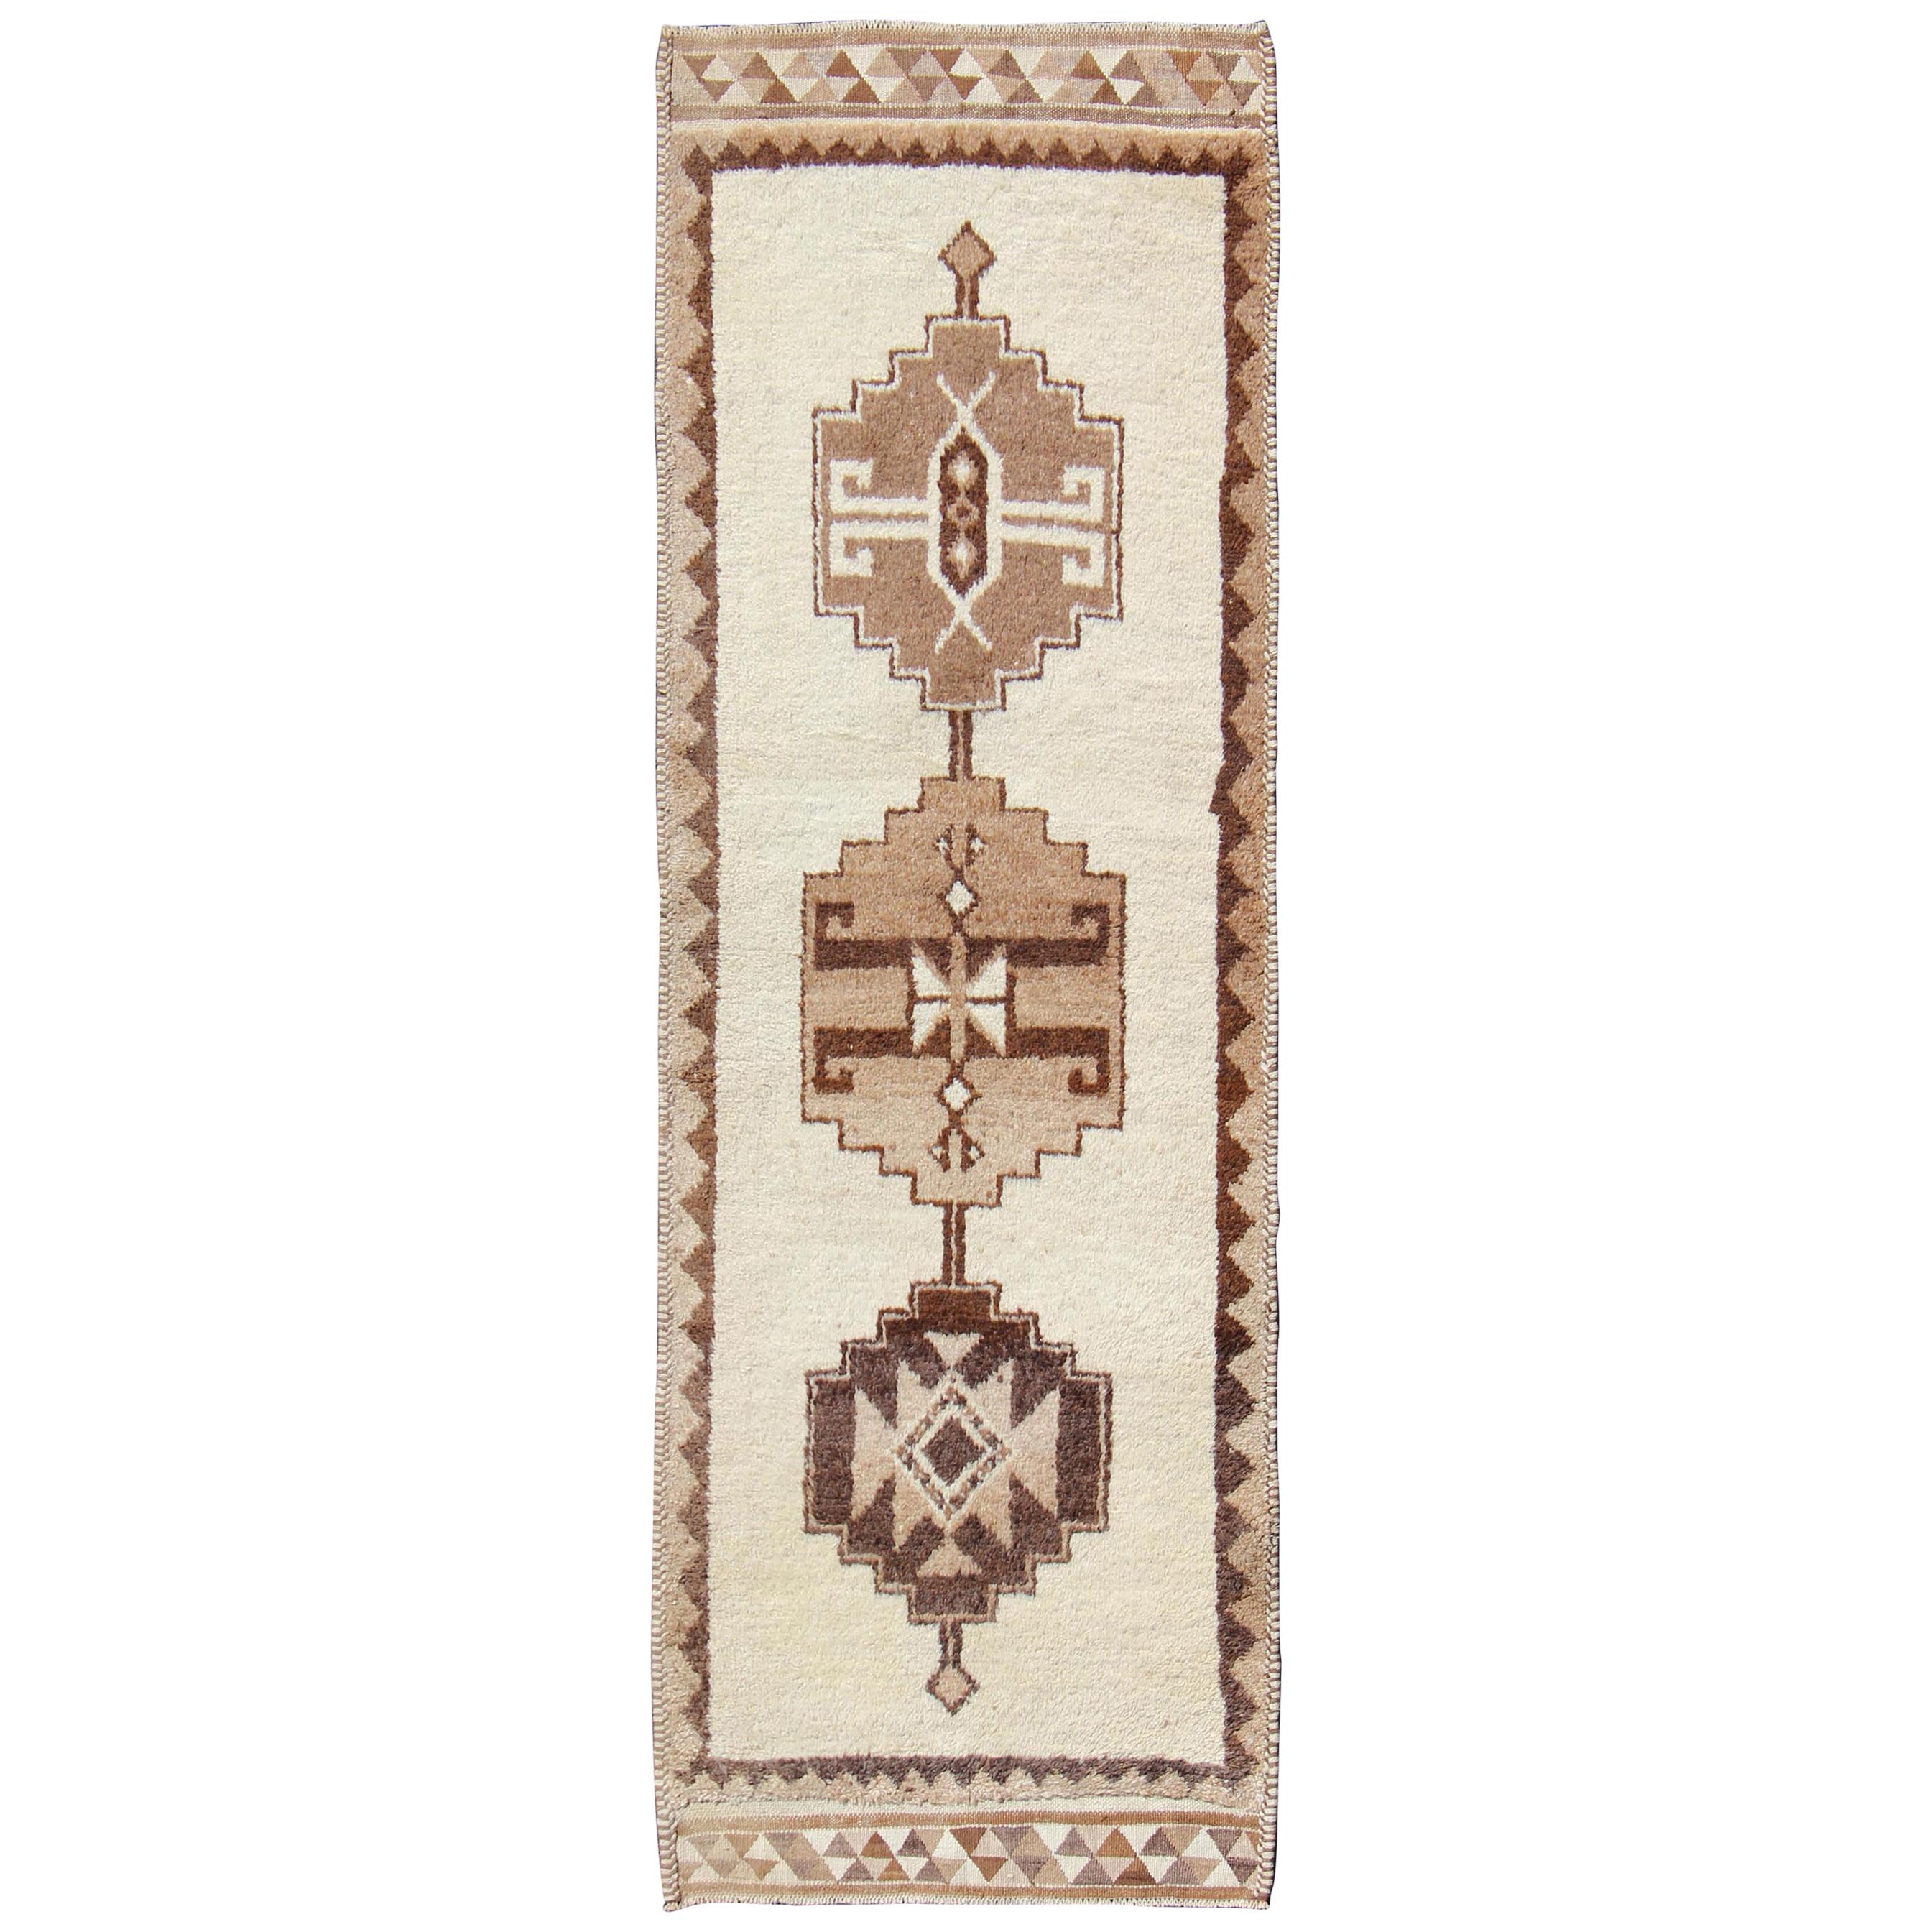 Vintage Turkish Tulu Gallery Rug with Tribal Motifs in Shades of Brown and Cream